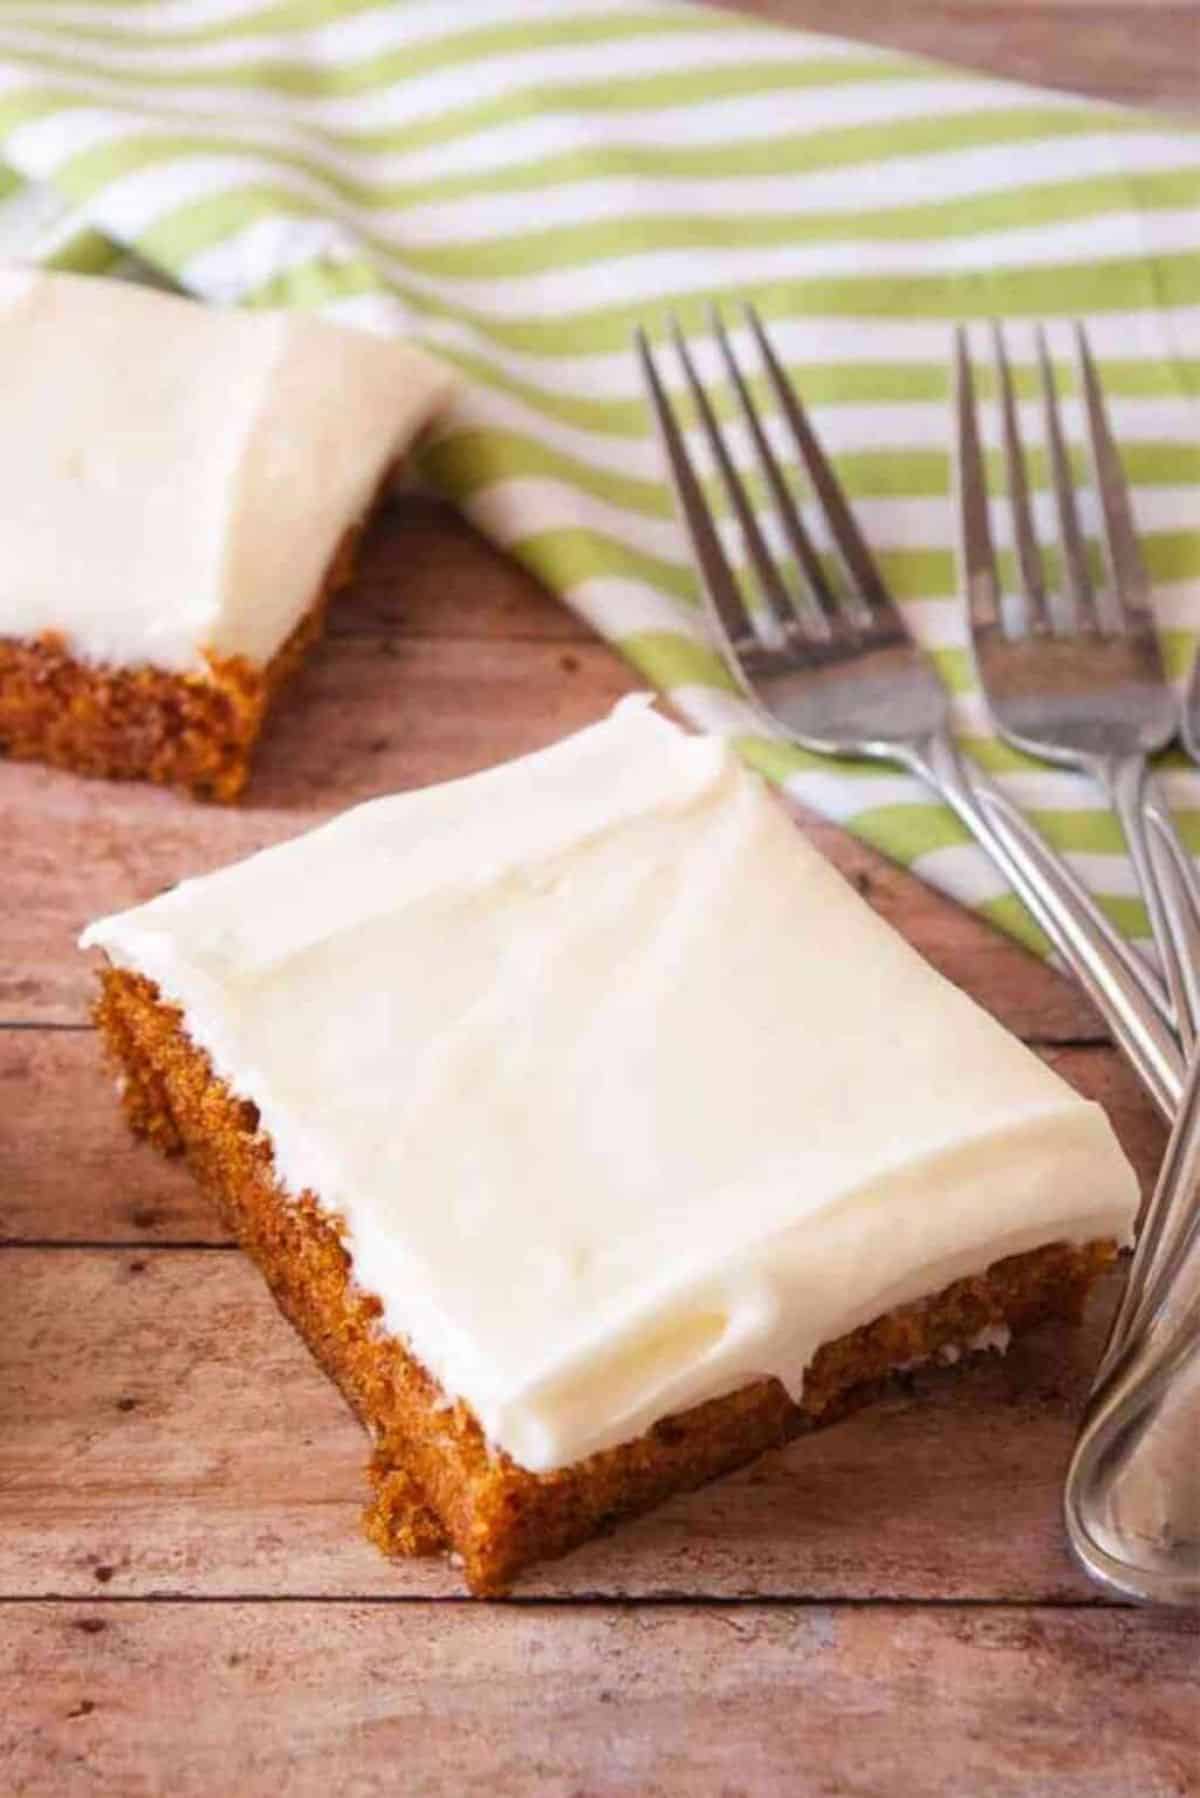 Two  pieces of Carrot Sheet Cake with Cream Cheese Frosting on a wooden table.